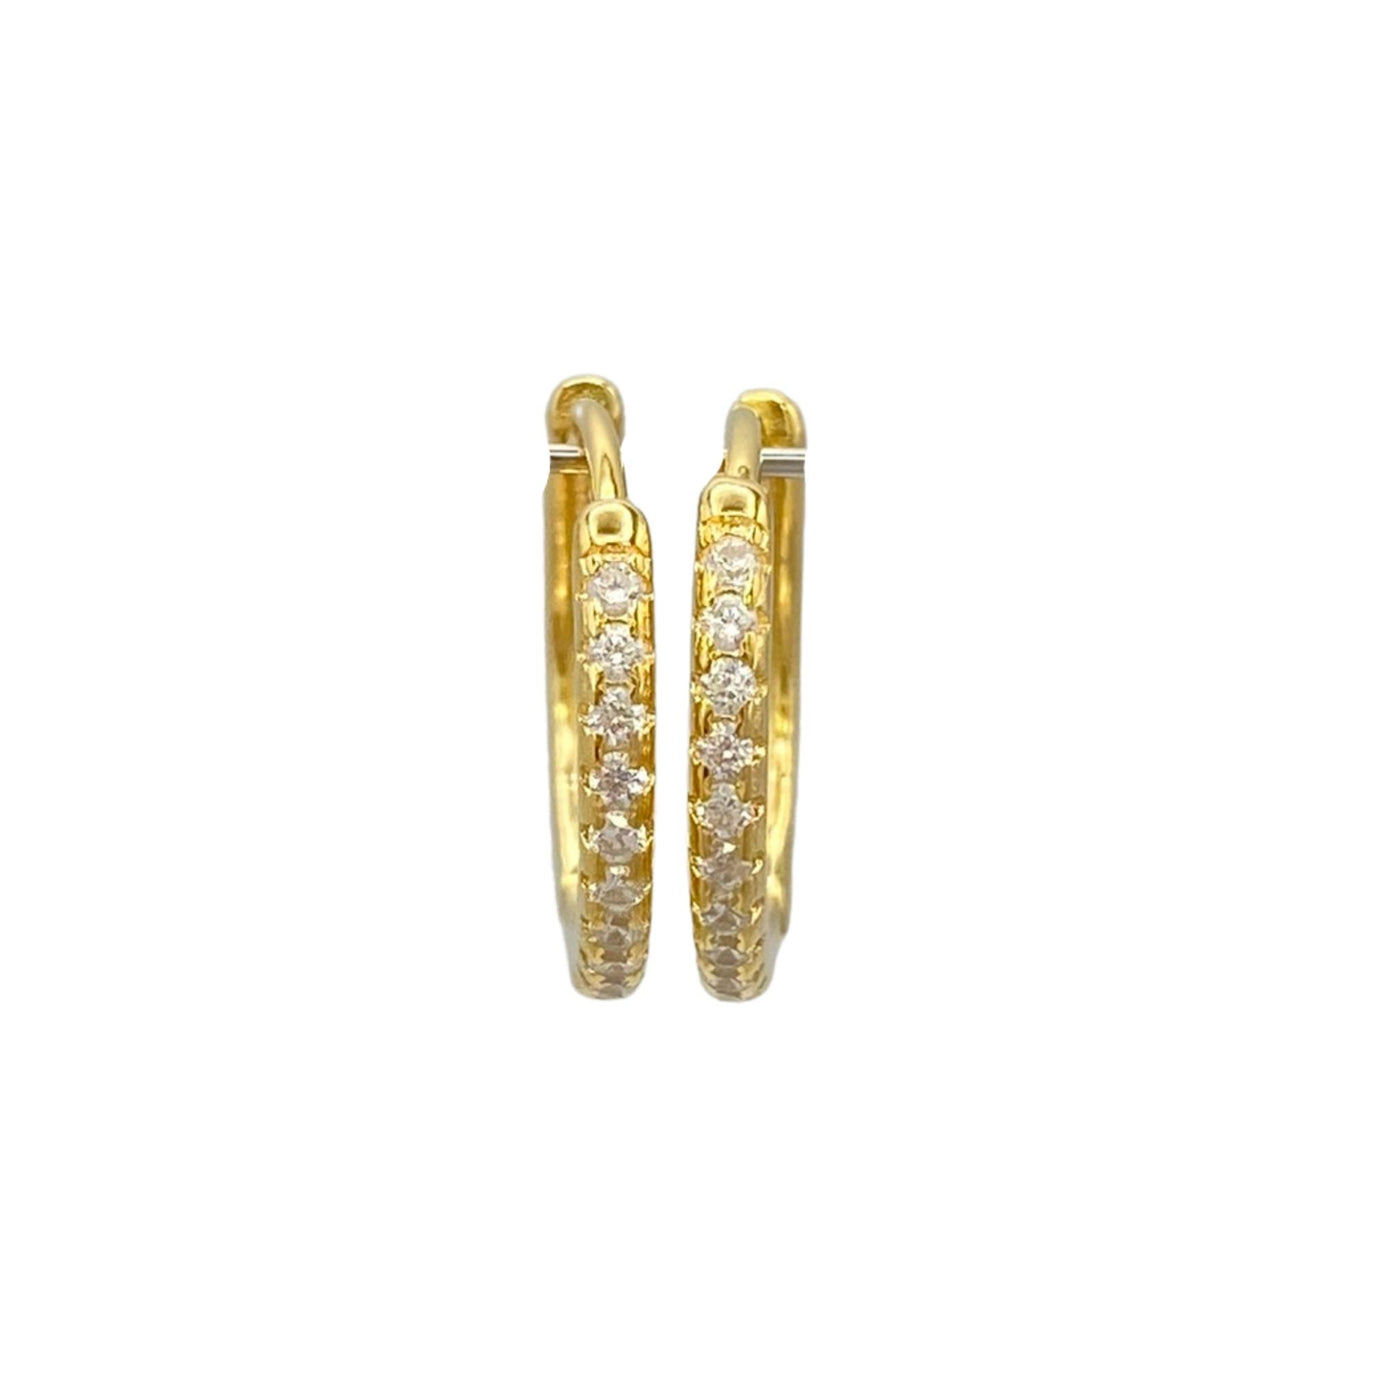 Silver hoop earrings with stones - yellow -15 mm